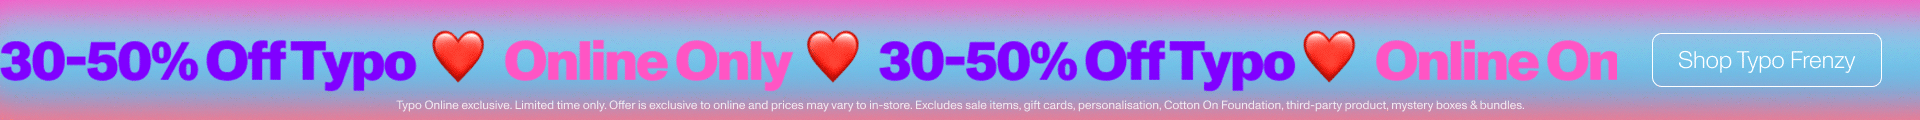 30-50% off typo. Online only. Shop typo frenzy.